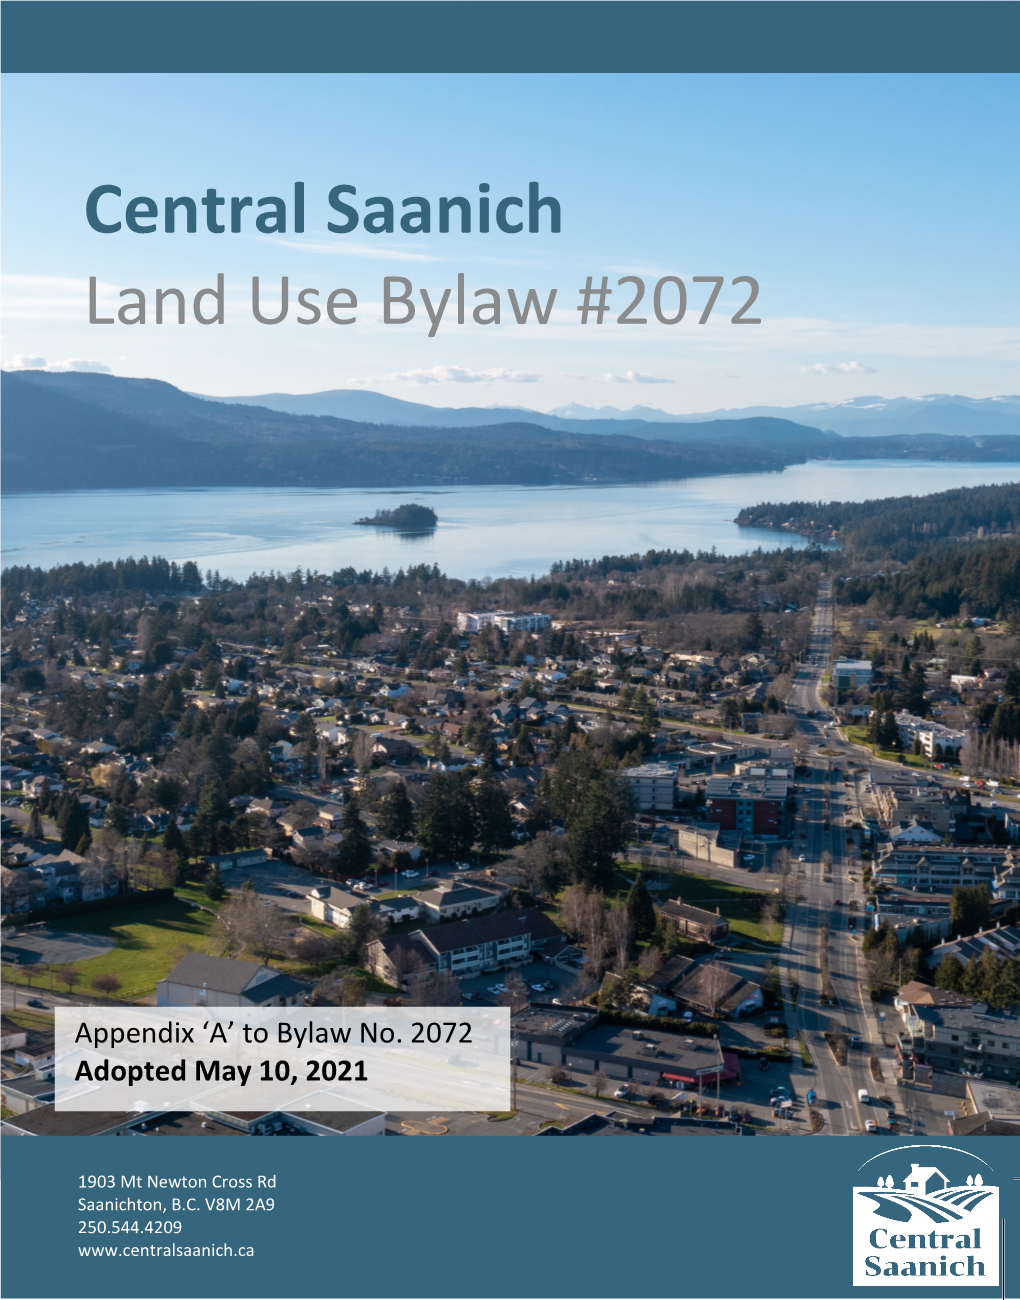 Central Saanich Land Use Bylaw #2072